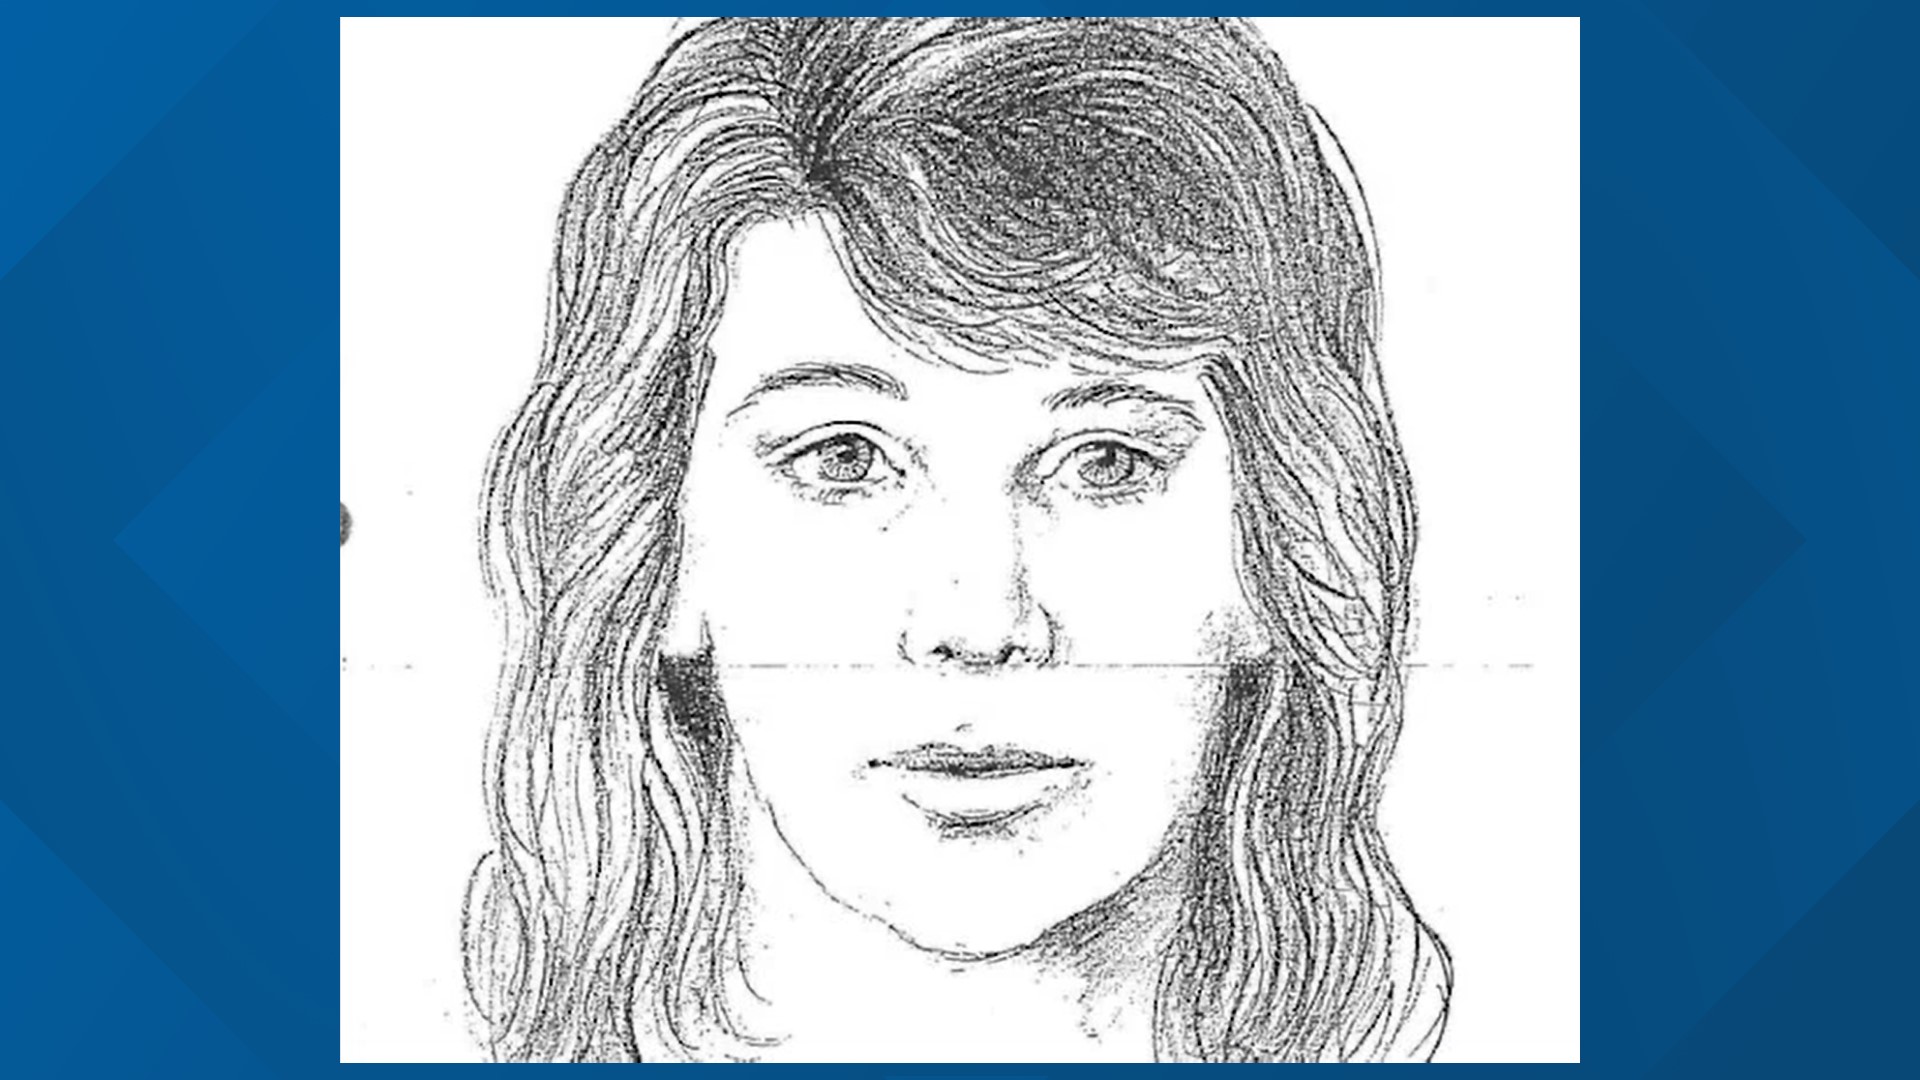 A hiker discovered the woman's body down an embankment in July 1984.